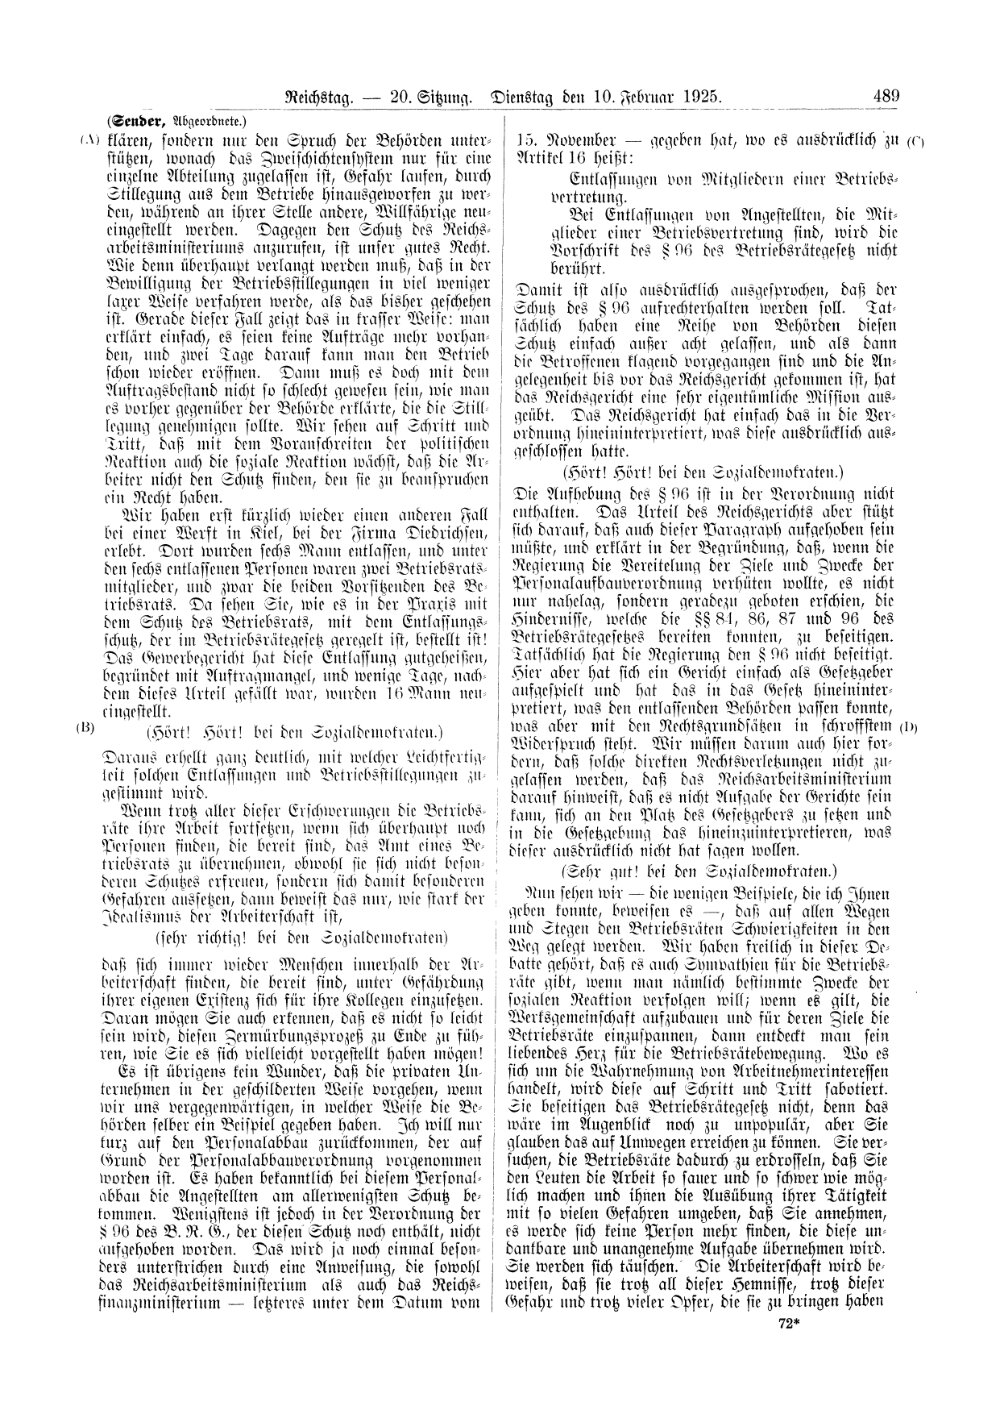 Scan of page 489